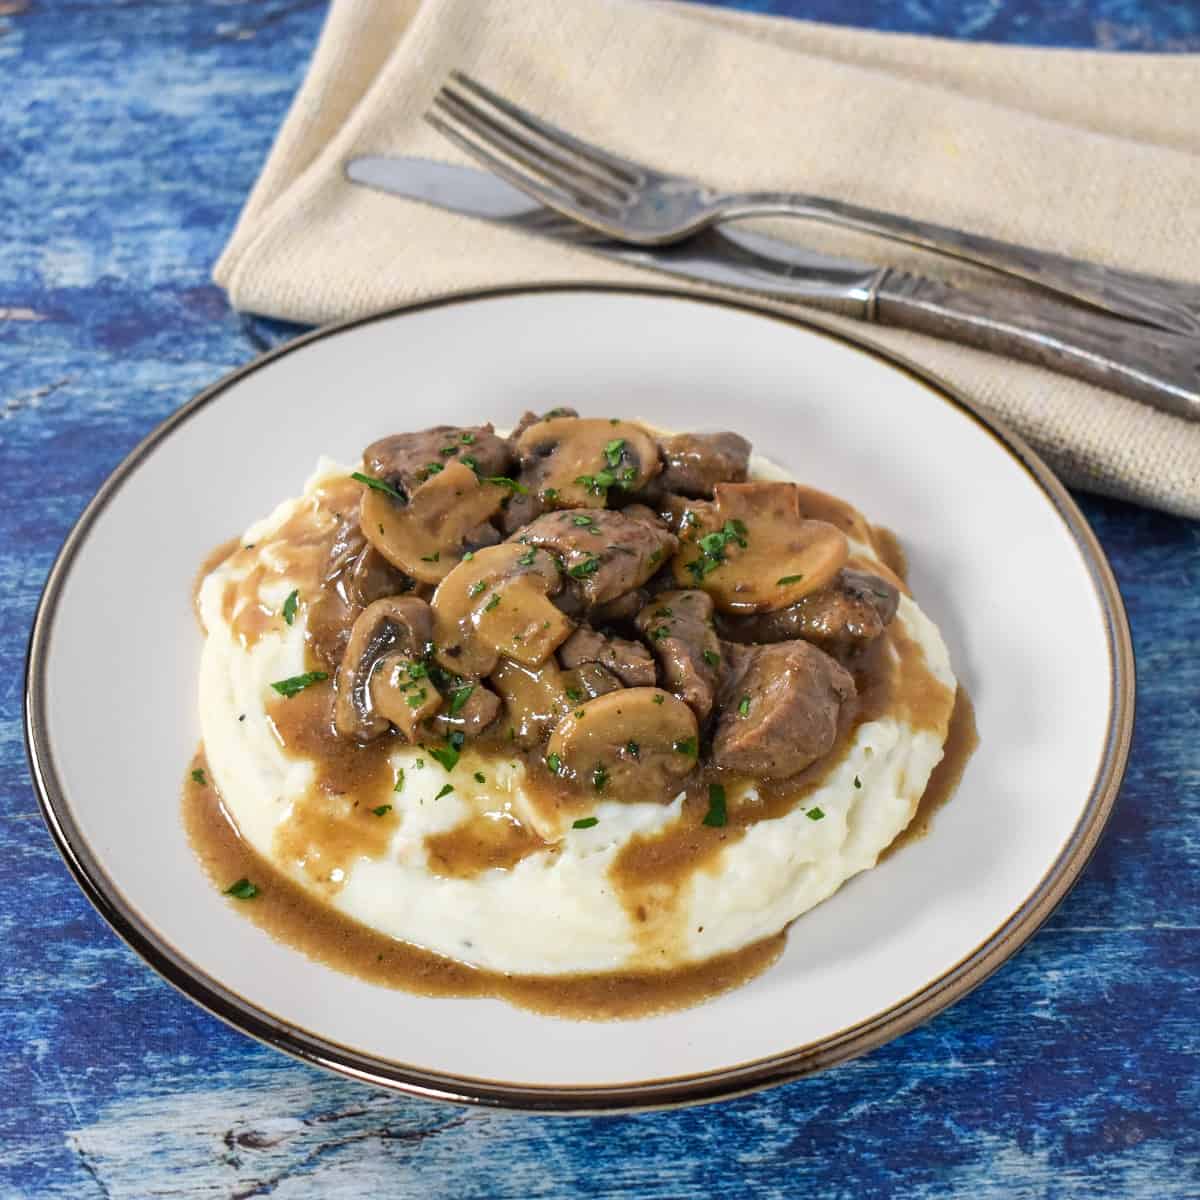 The beef tips and mushrooms served on a bed of mashed potatoes on a white plate with a beige linen and fork and knife in the background.